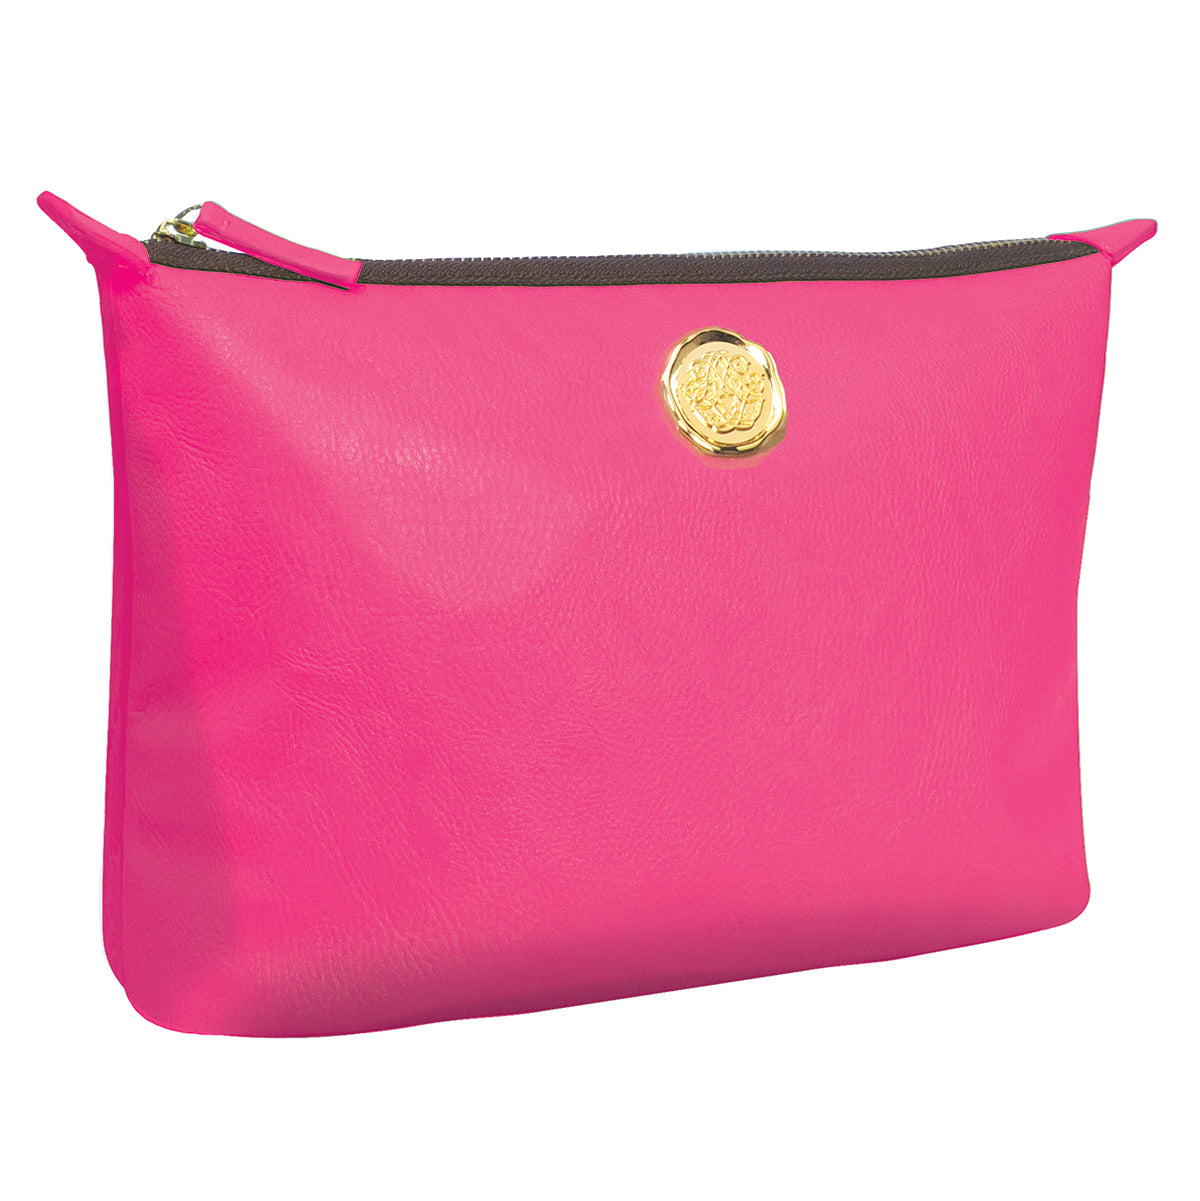 a pink purse with a gold emblem on it.